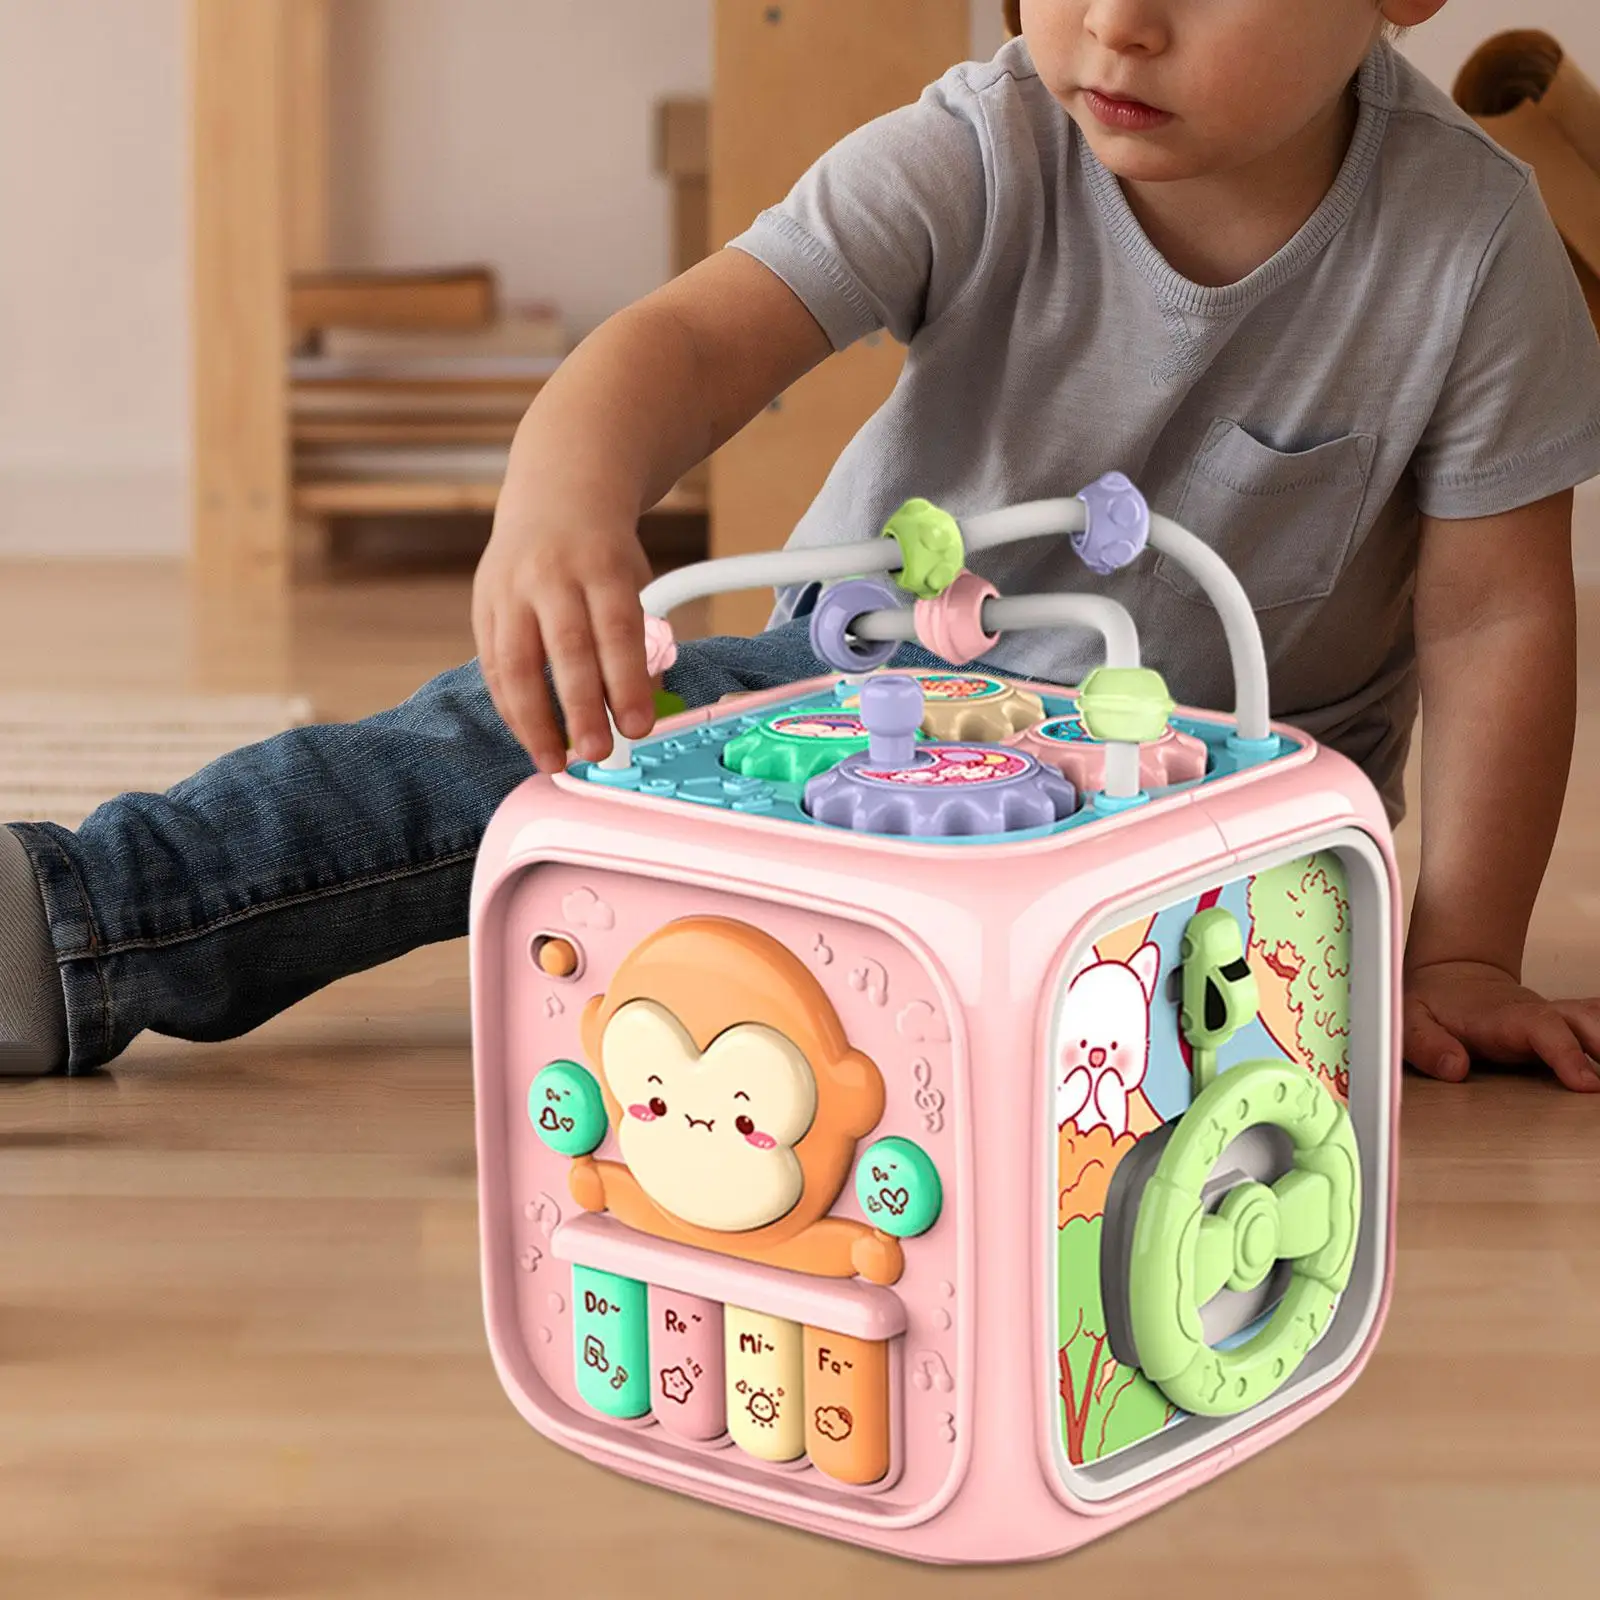 Baby Busy Cube Ball Travel Learning Toy Portable Fine Motor Skills for 18-36 Month Infants Boys and Girls Birthday Gift Children